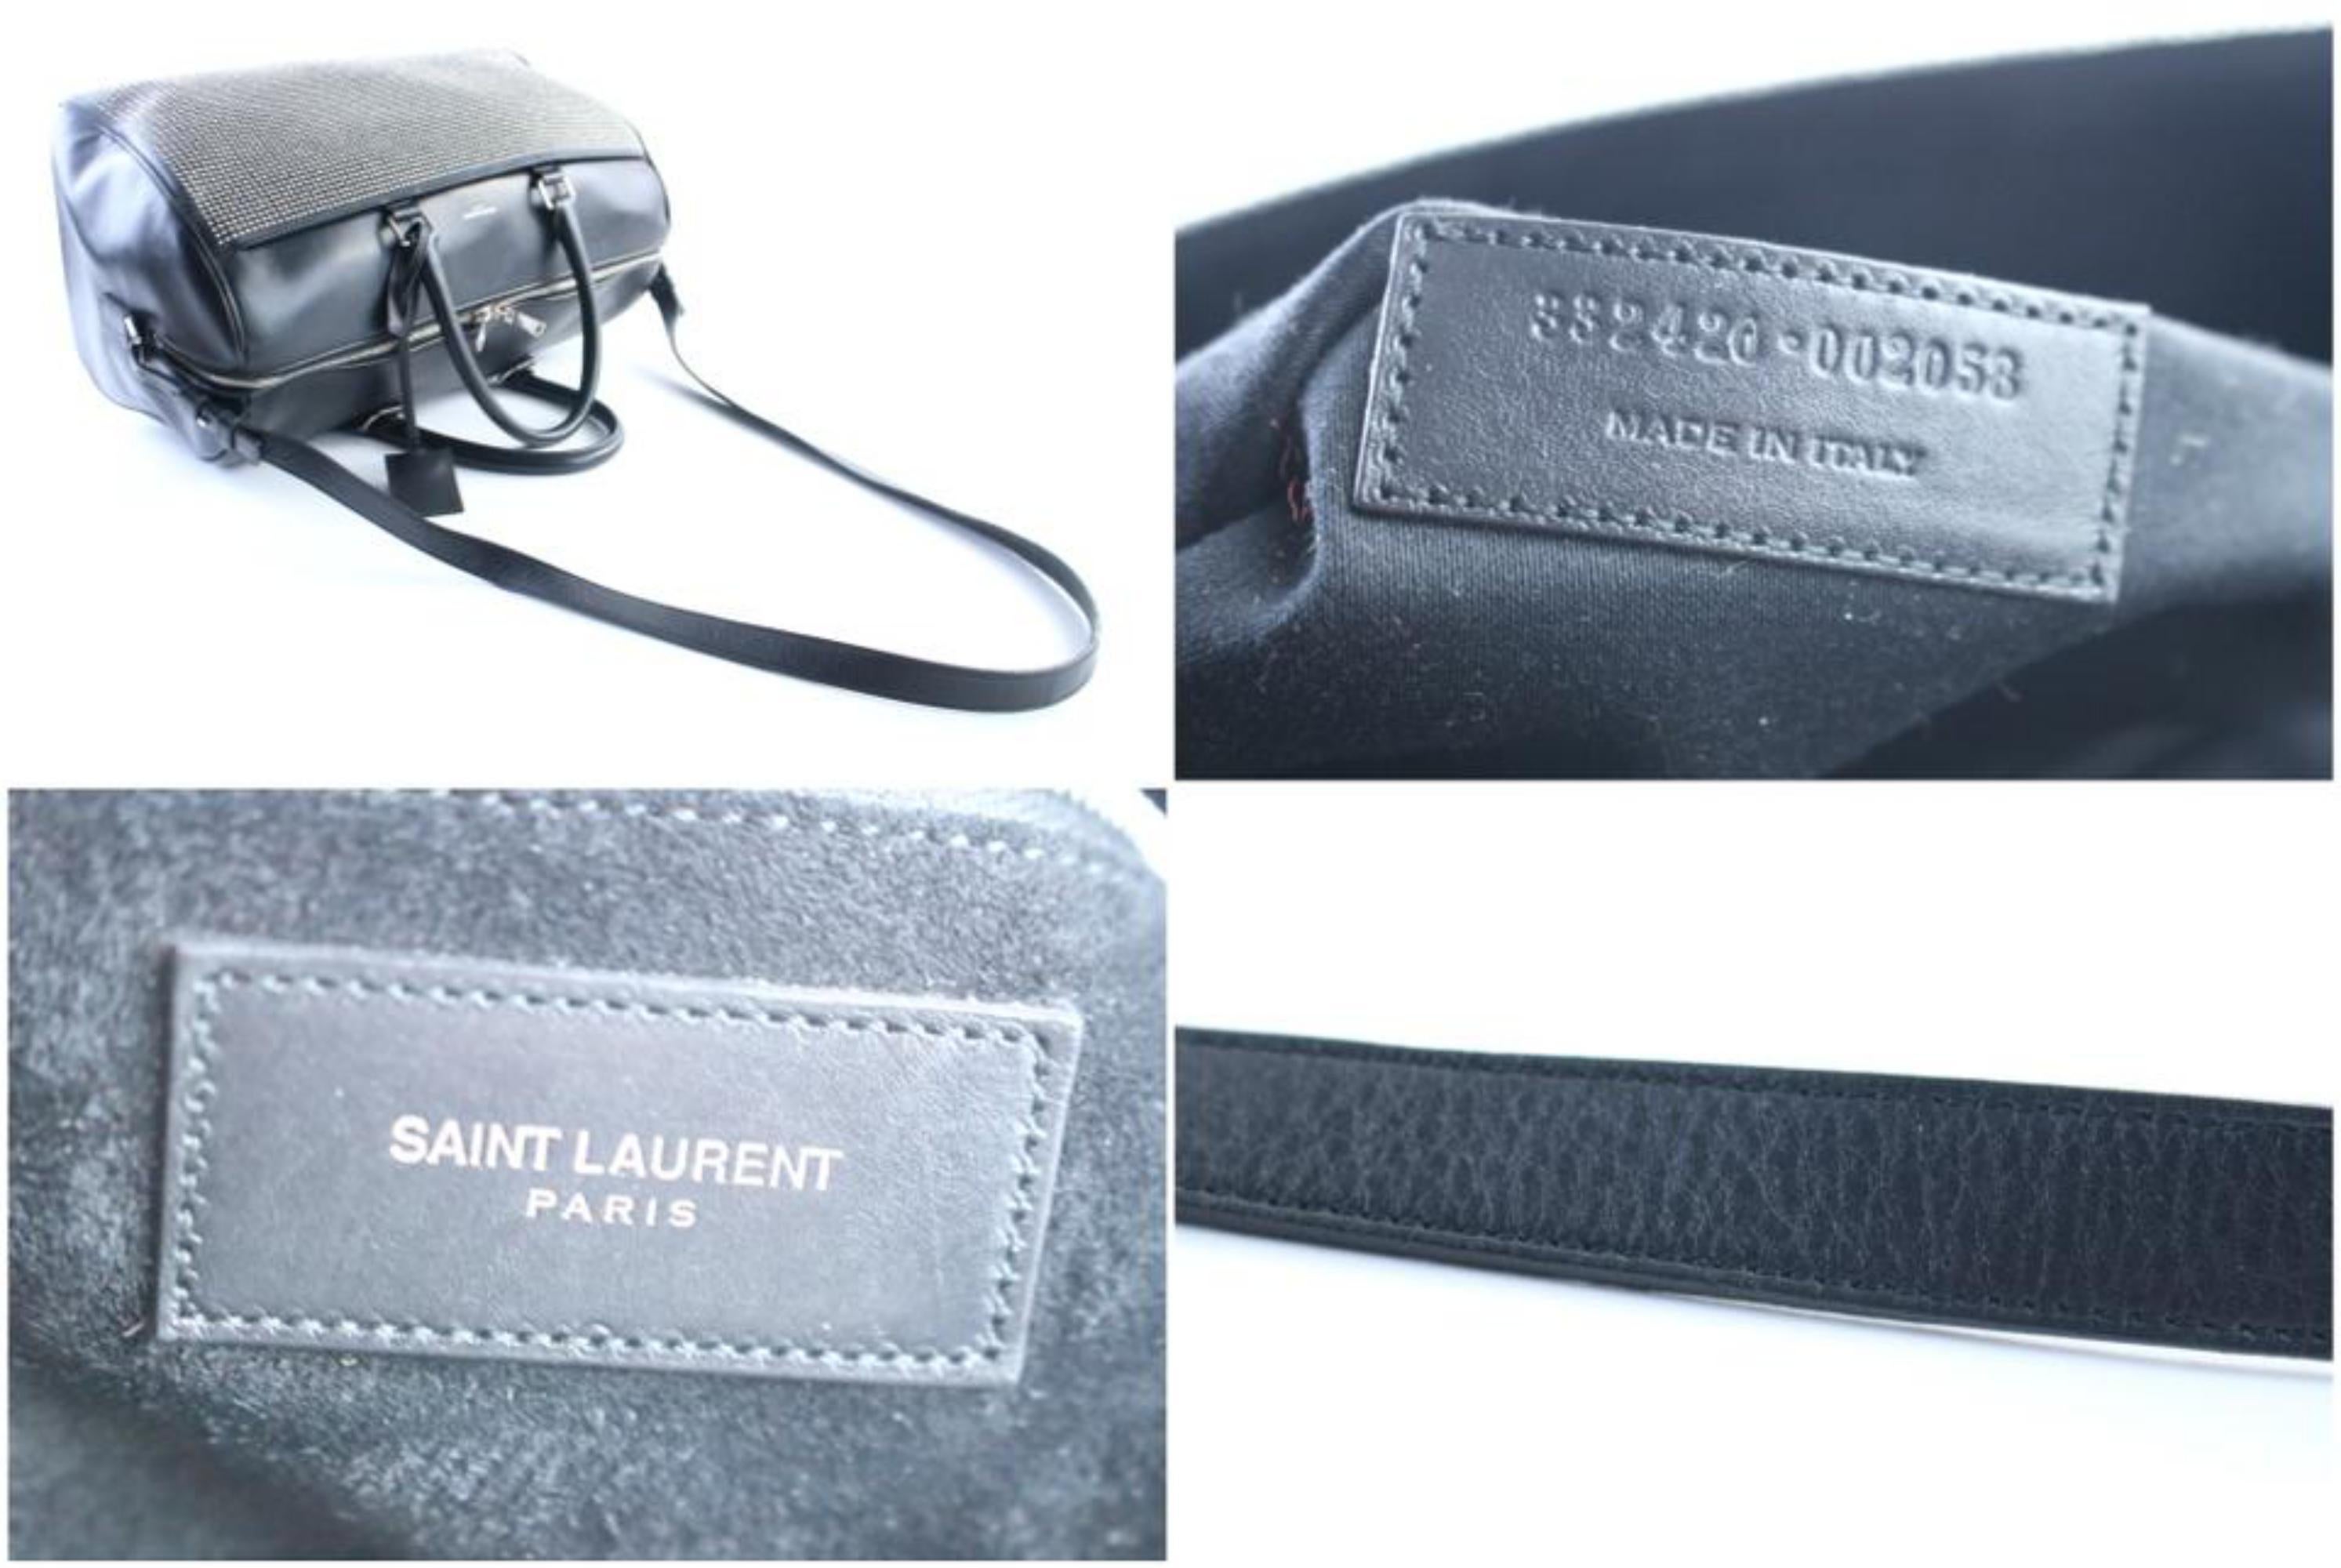 Saint Laurent Duffle Studded 6 Hour 10mr0503 Black Leather Weekend/Travel Bag In Excellent Condition For Sale In Forest Hills, NY